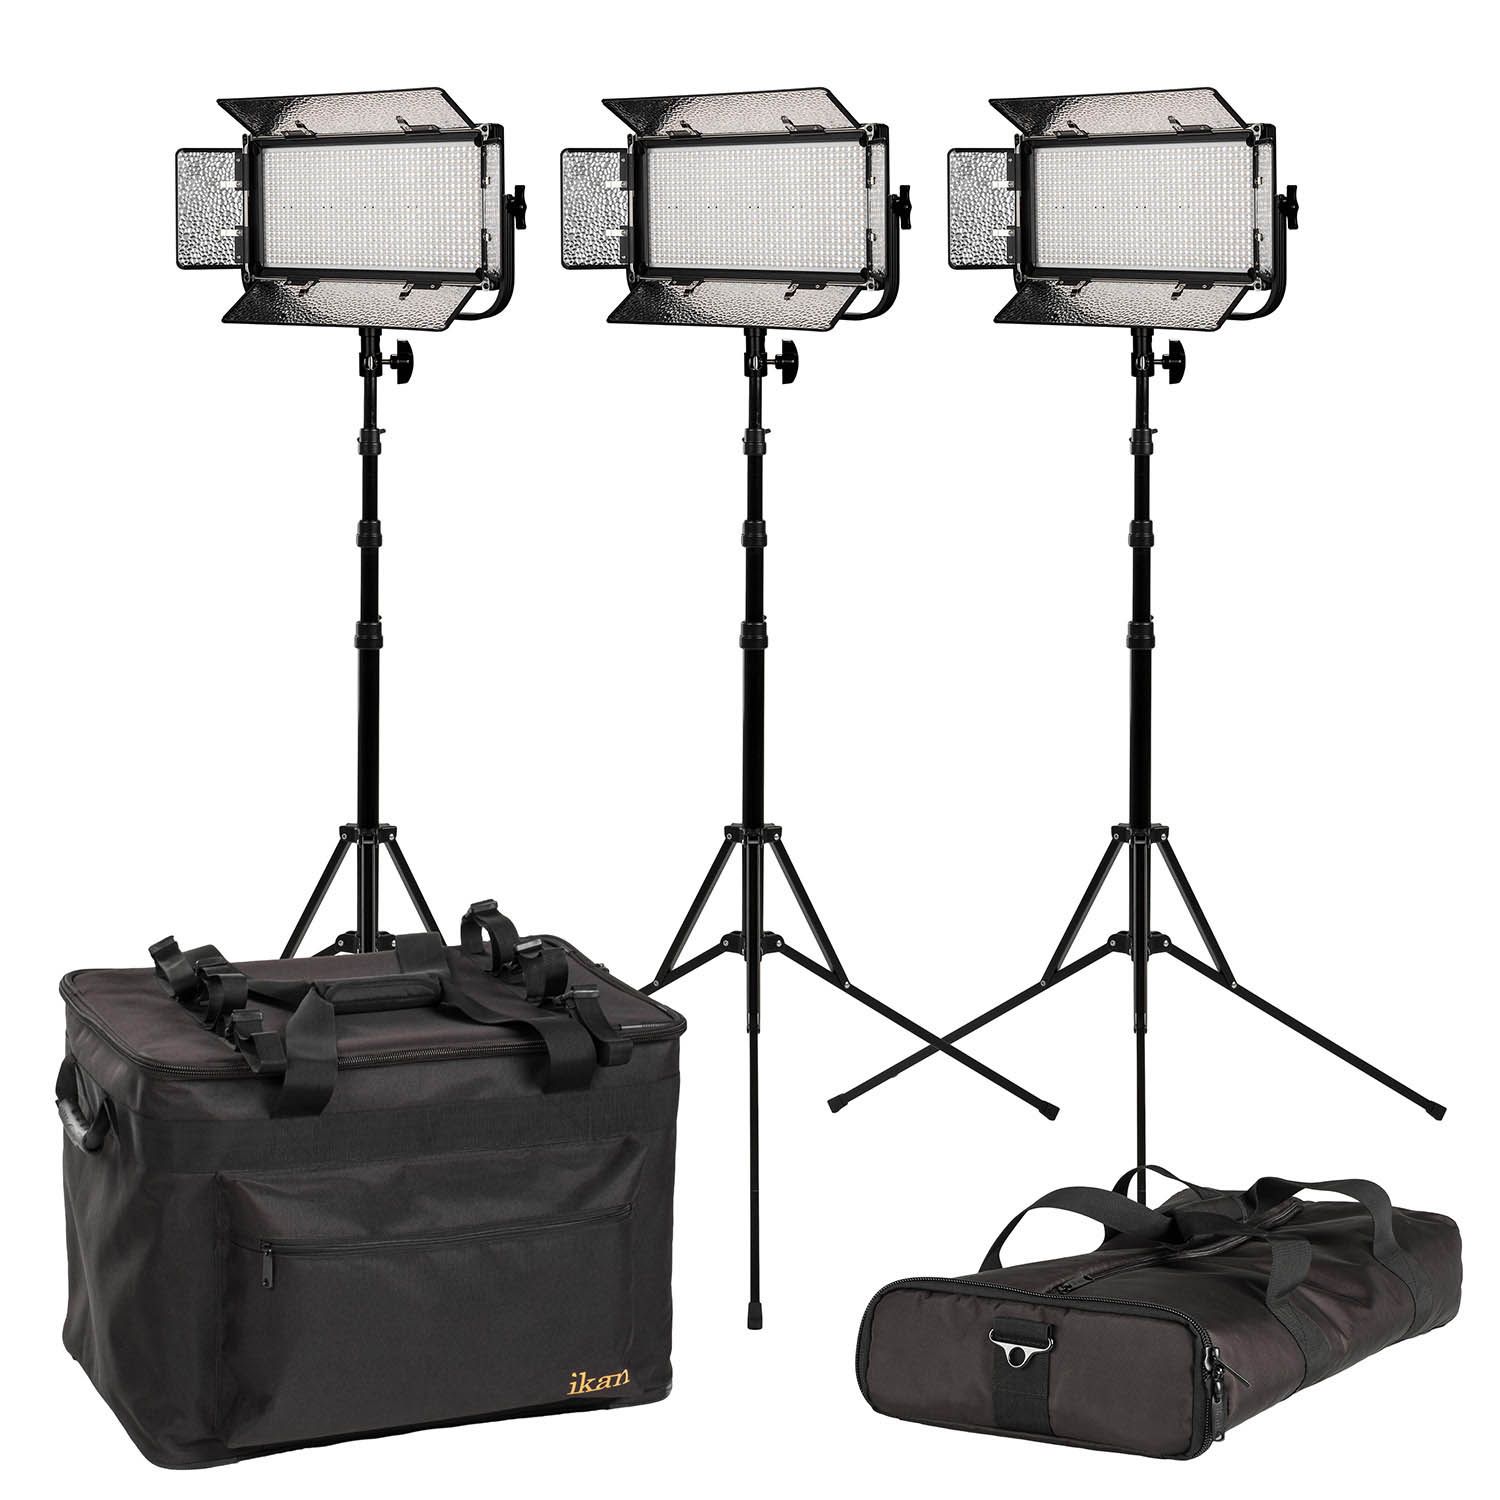 LED Studio Light  Set, For Photography, Filming, YouTube Filming, Used -Good Condition 